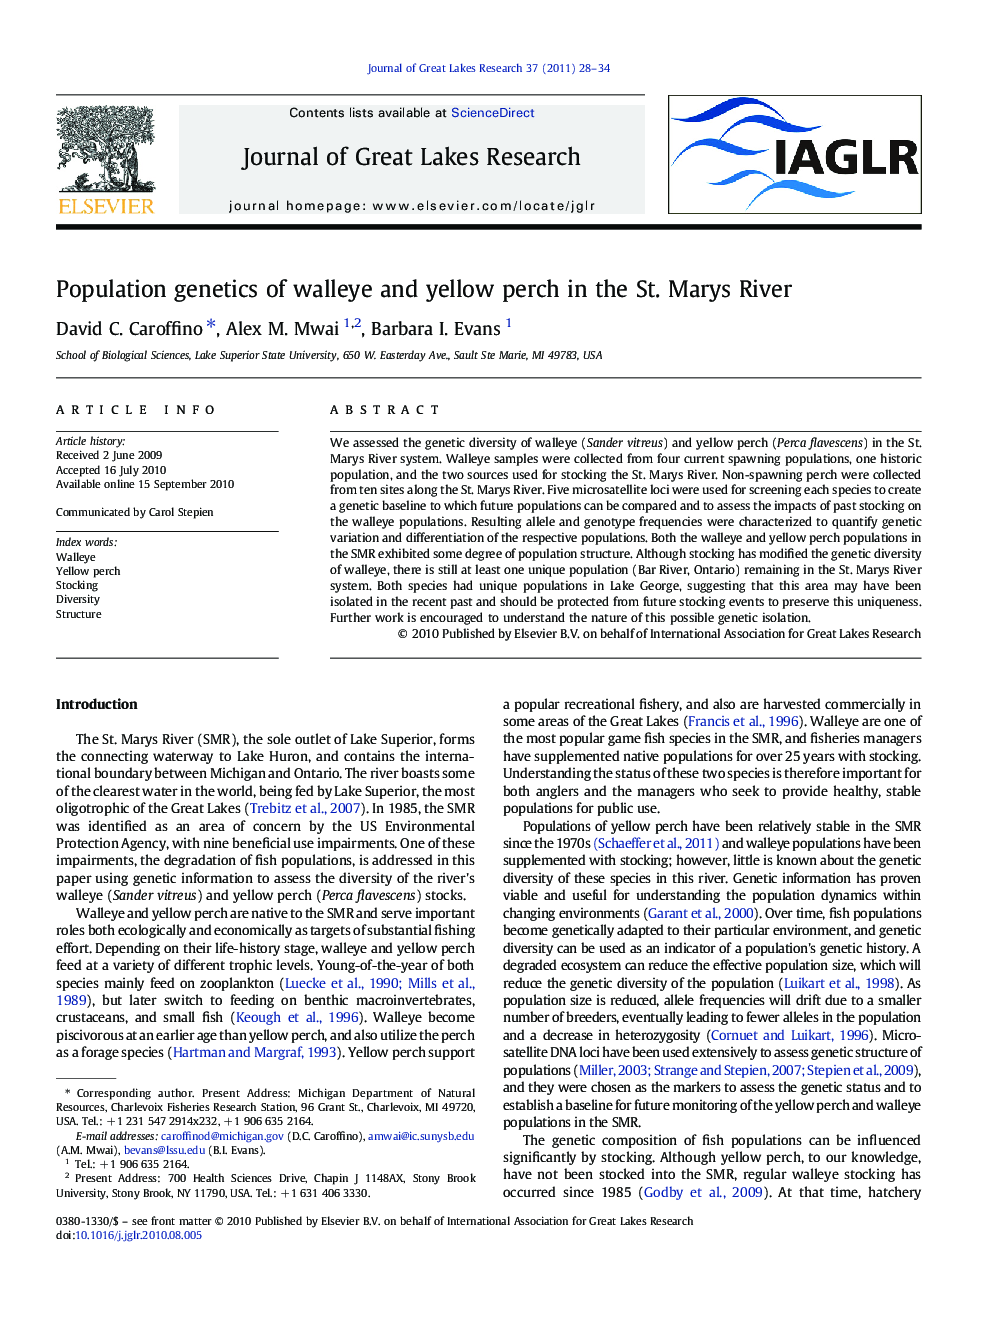 Population genetics of walleye and yellow perch in the St. Marys River